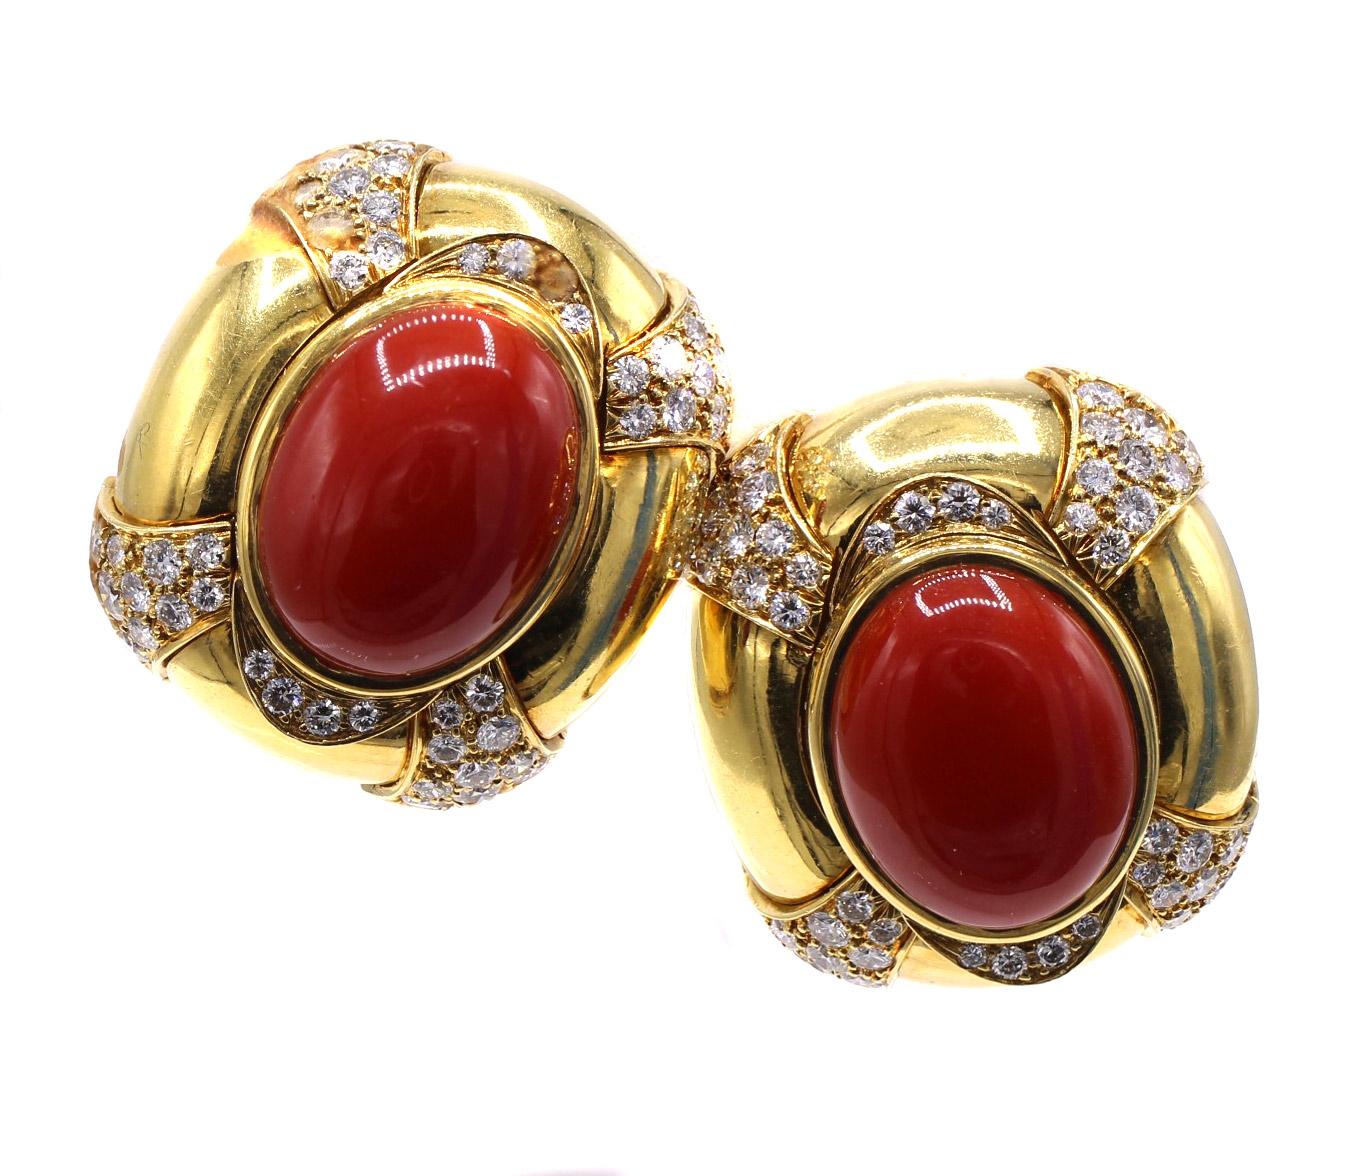 Tiffany & Co Convertible Ruby Amethyst Coral Diamond Yellow Gold Ear Clips In Excellent Condition For Sale In New York, NY